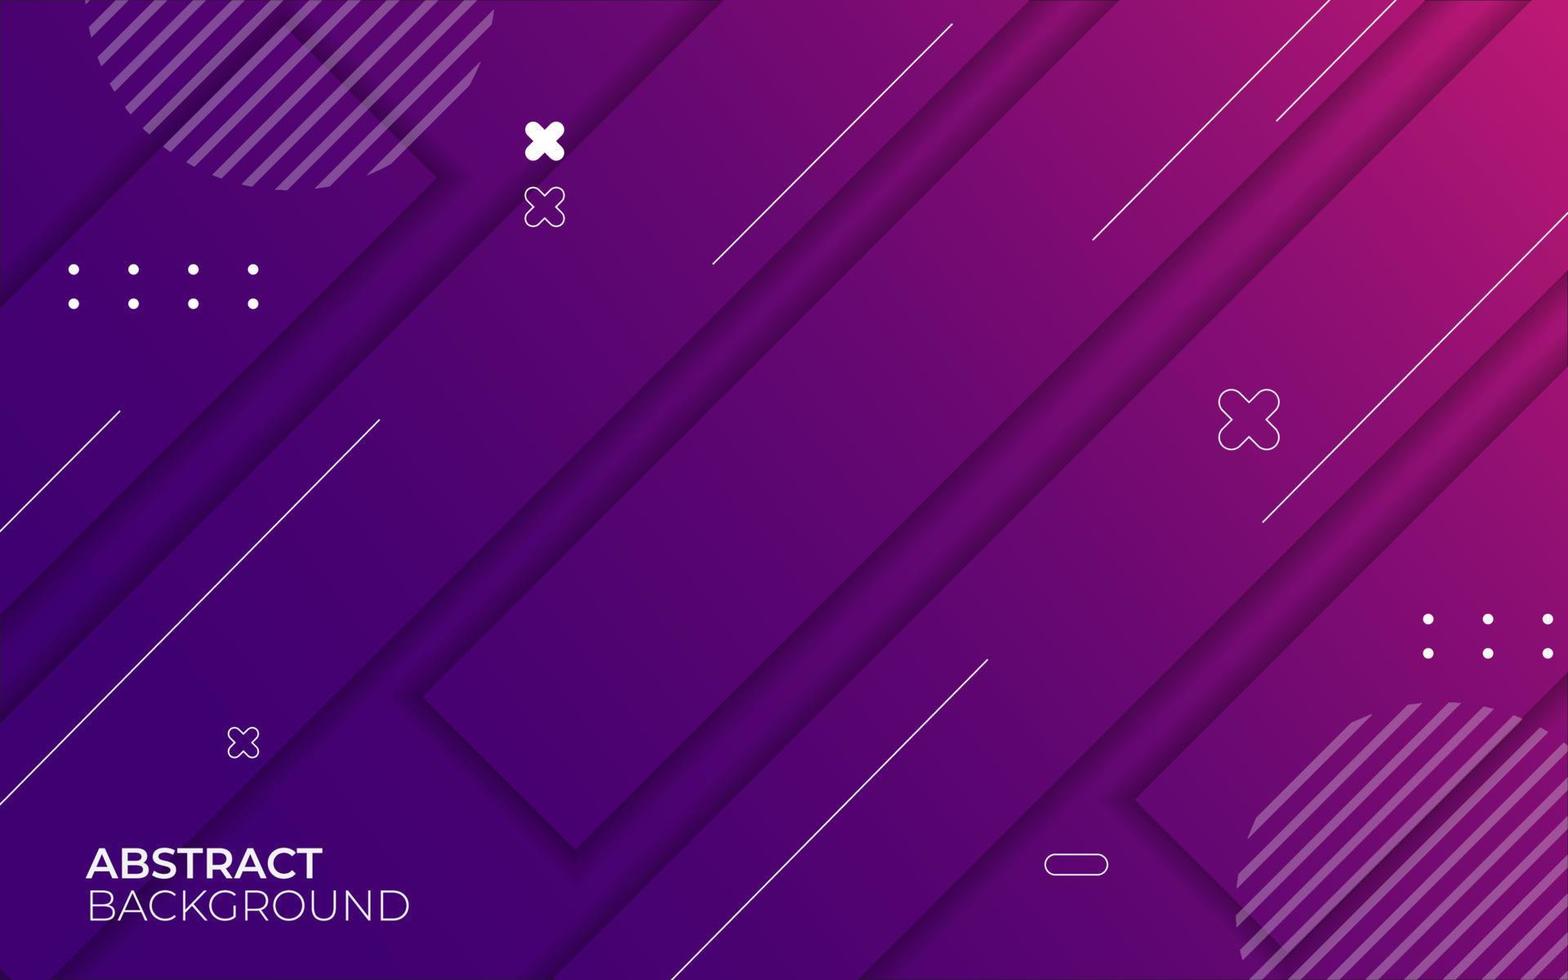 Abstract geometric background in purple and pink colors vector